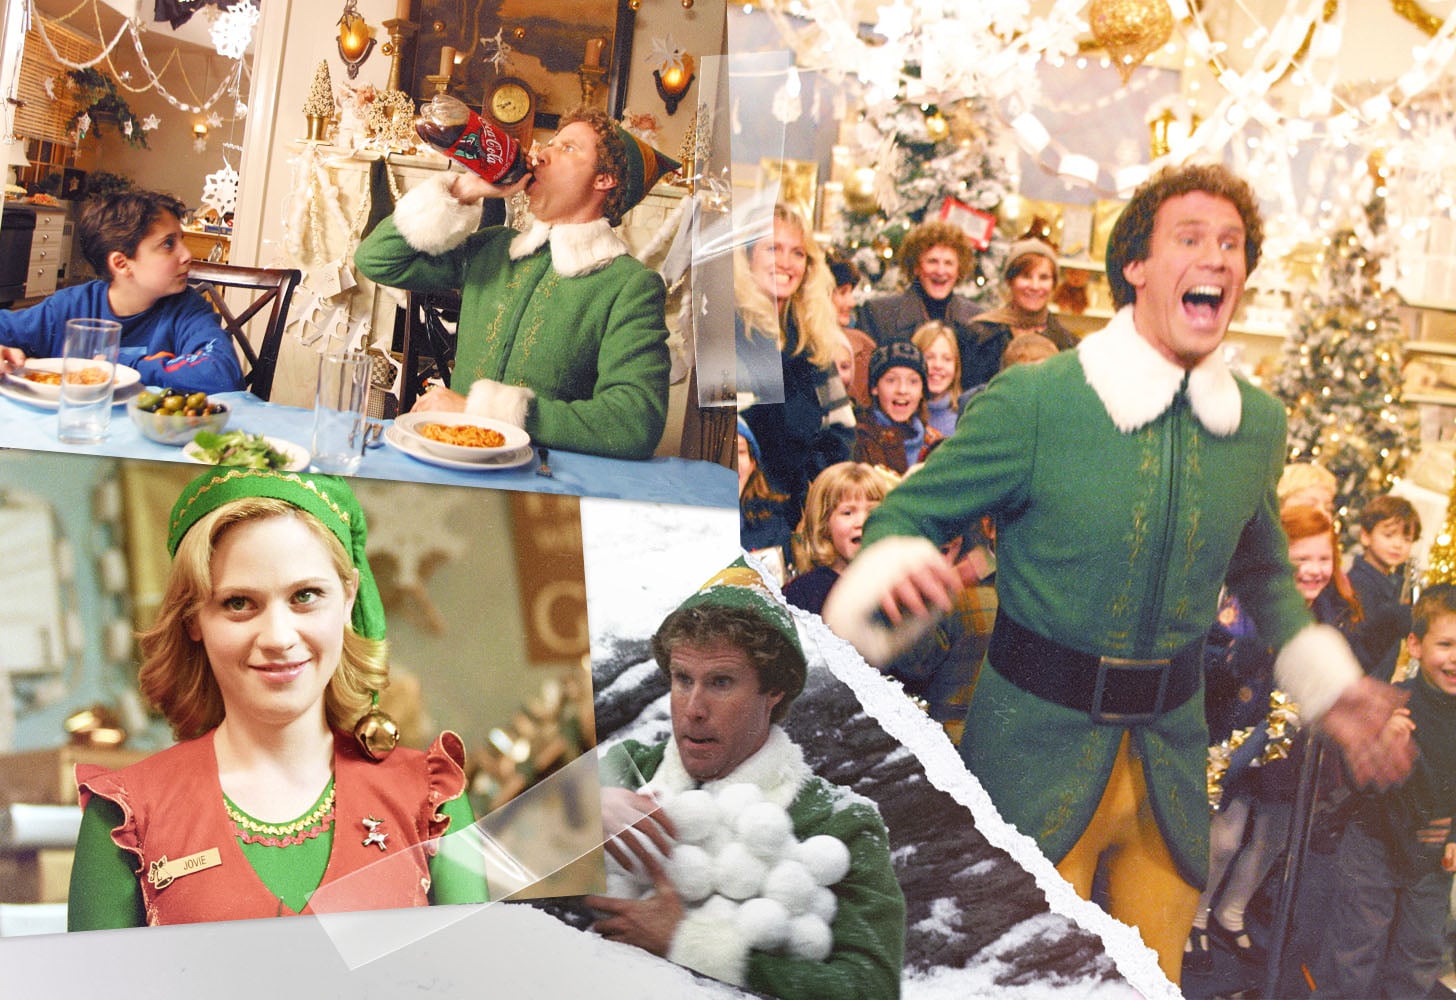 Photos from the movie Elf featuring Will Ferrell and Zooey Deschanel